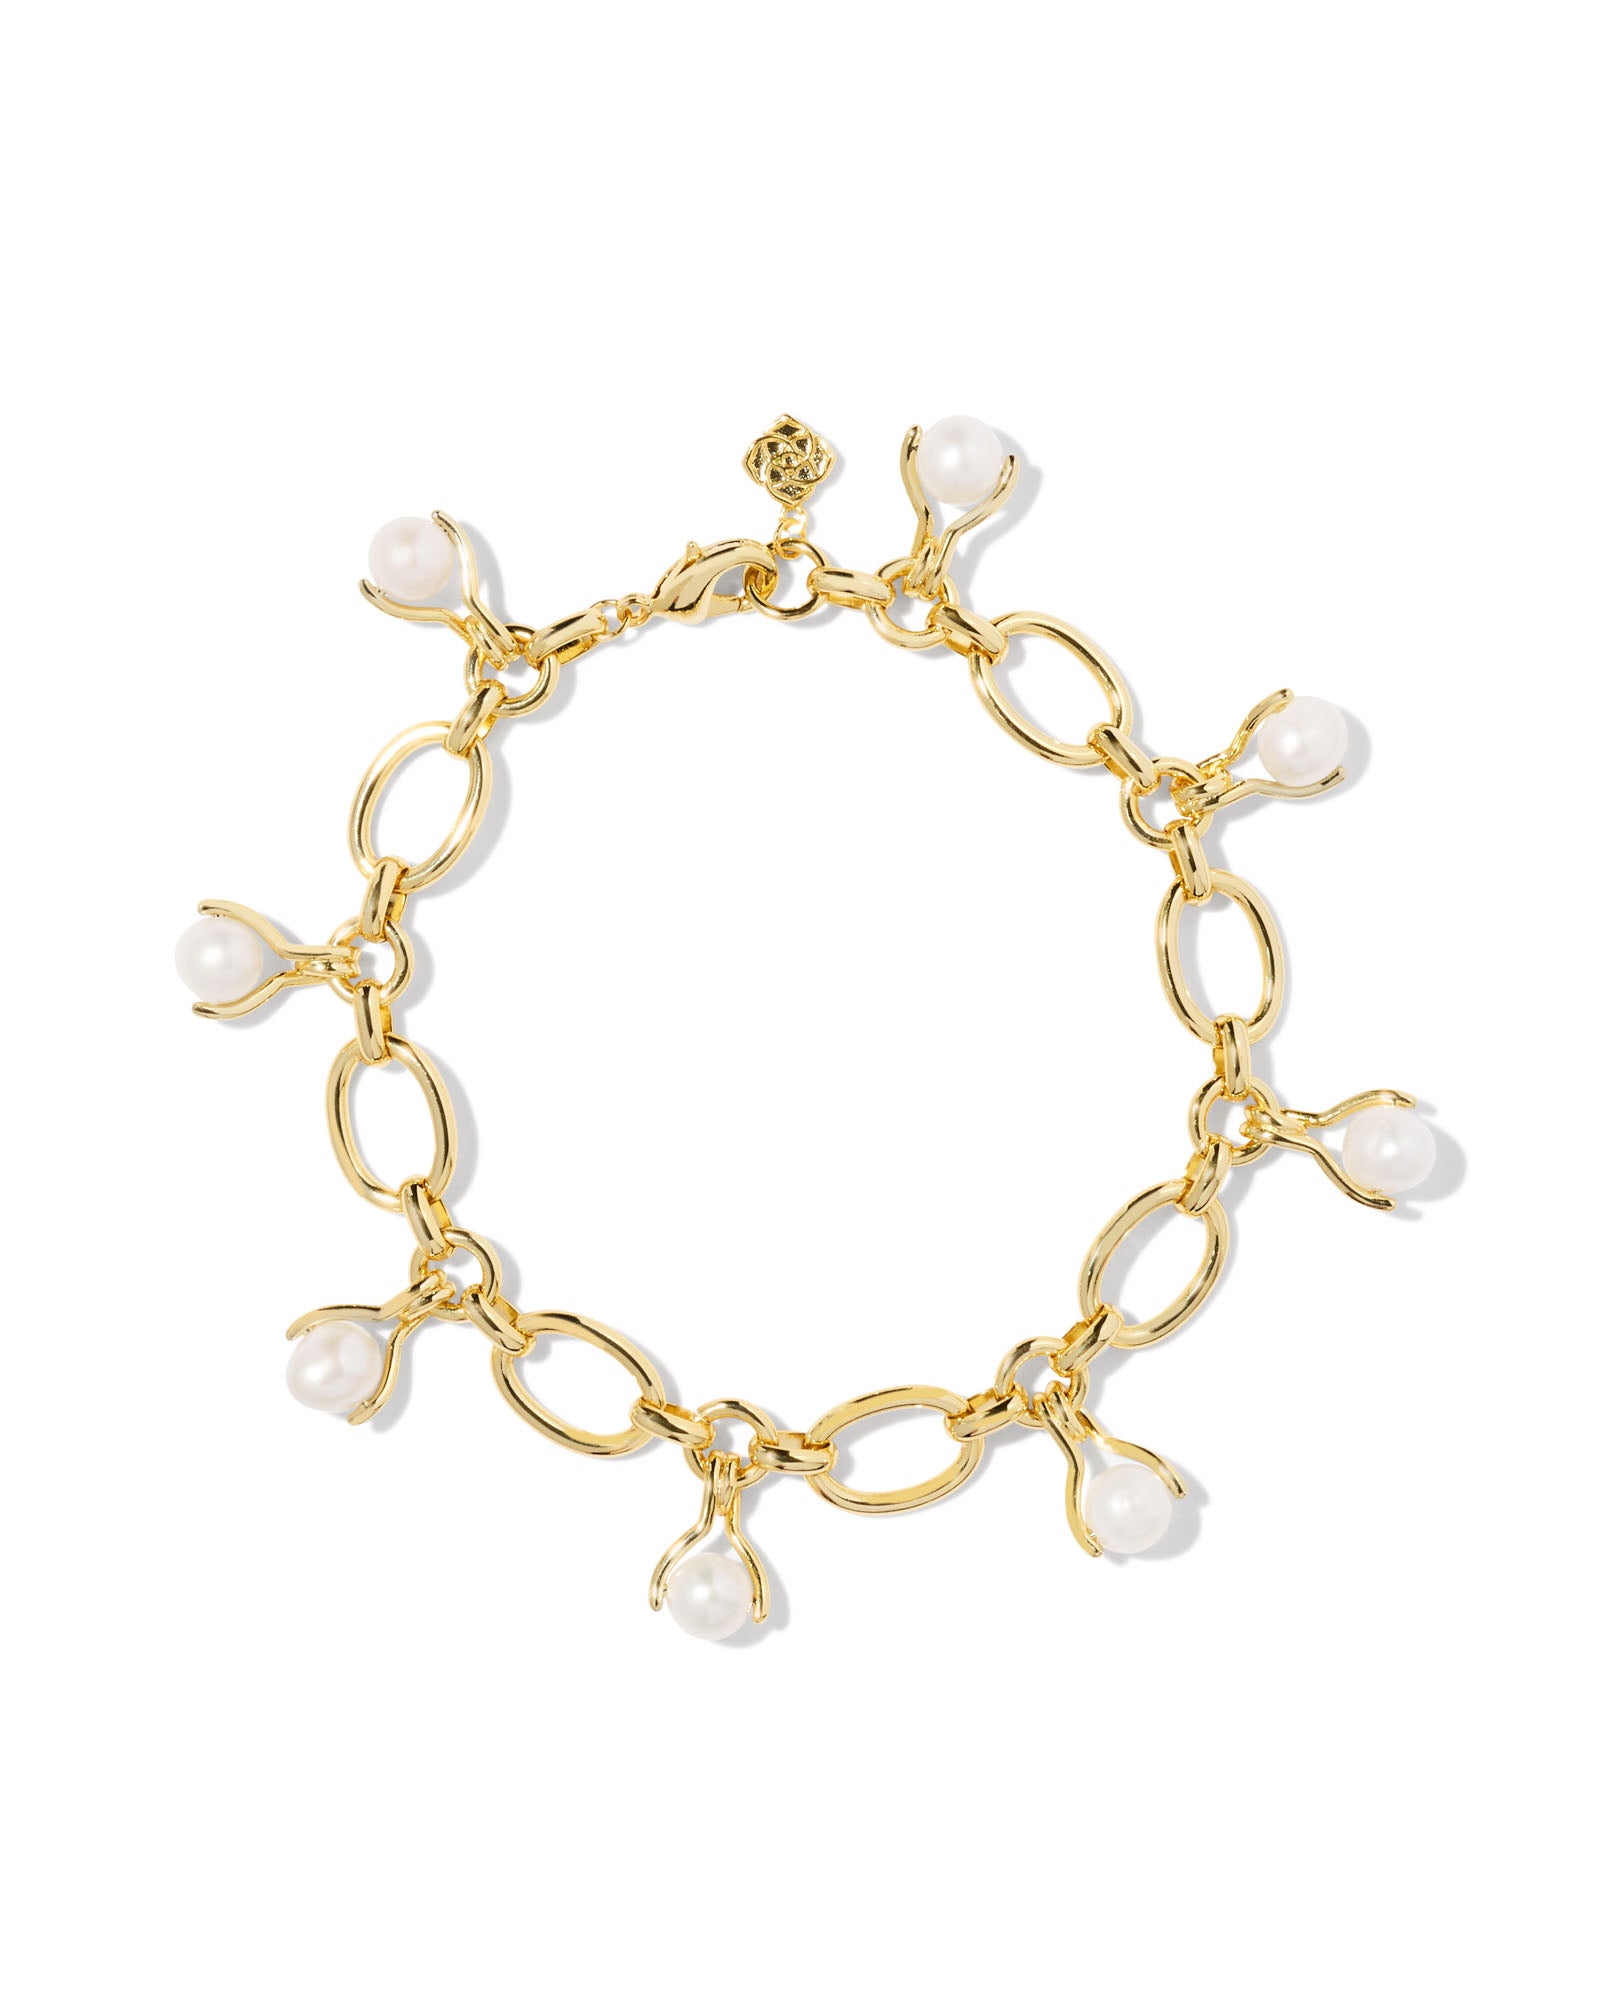 Kendra Scott Ashton Chain Charm Bracelet in White Pearl and Gold Plated